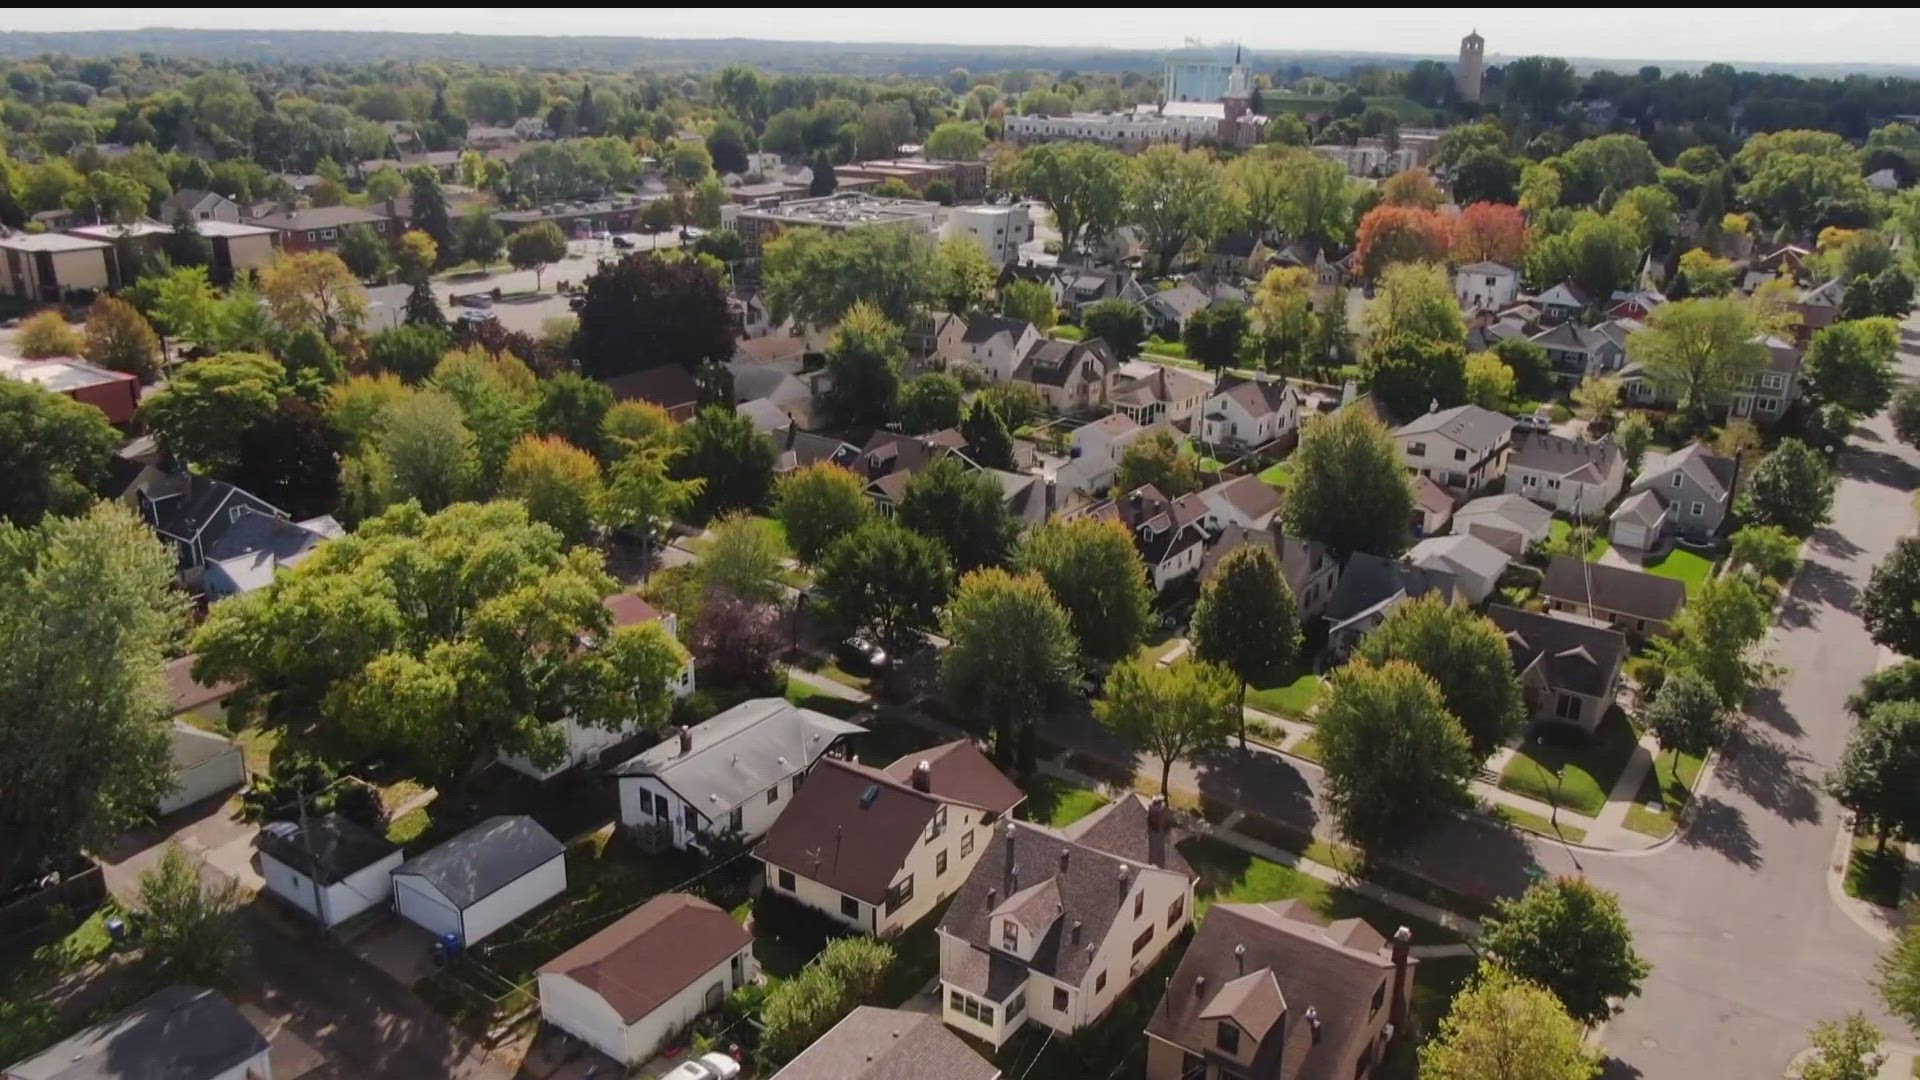 A national study shows that the Twin Cities area has a housing shortage of 80,000 units.